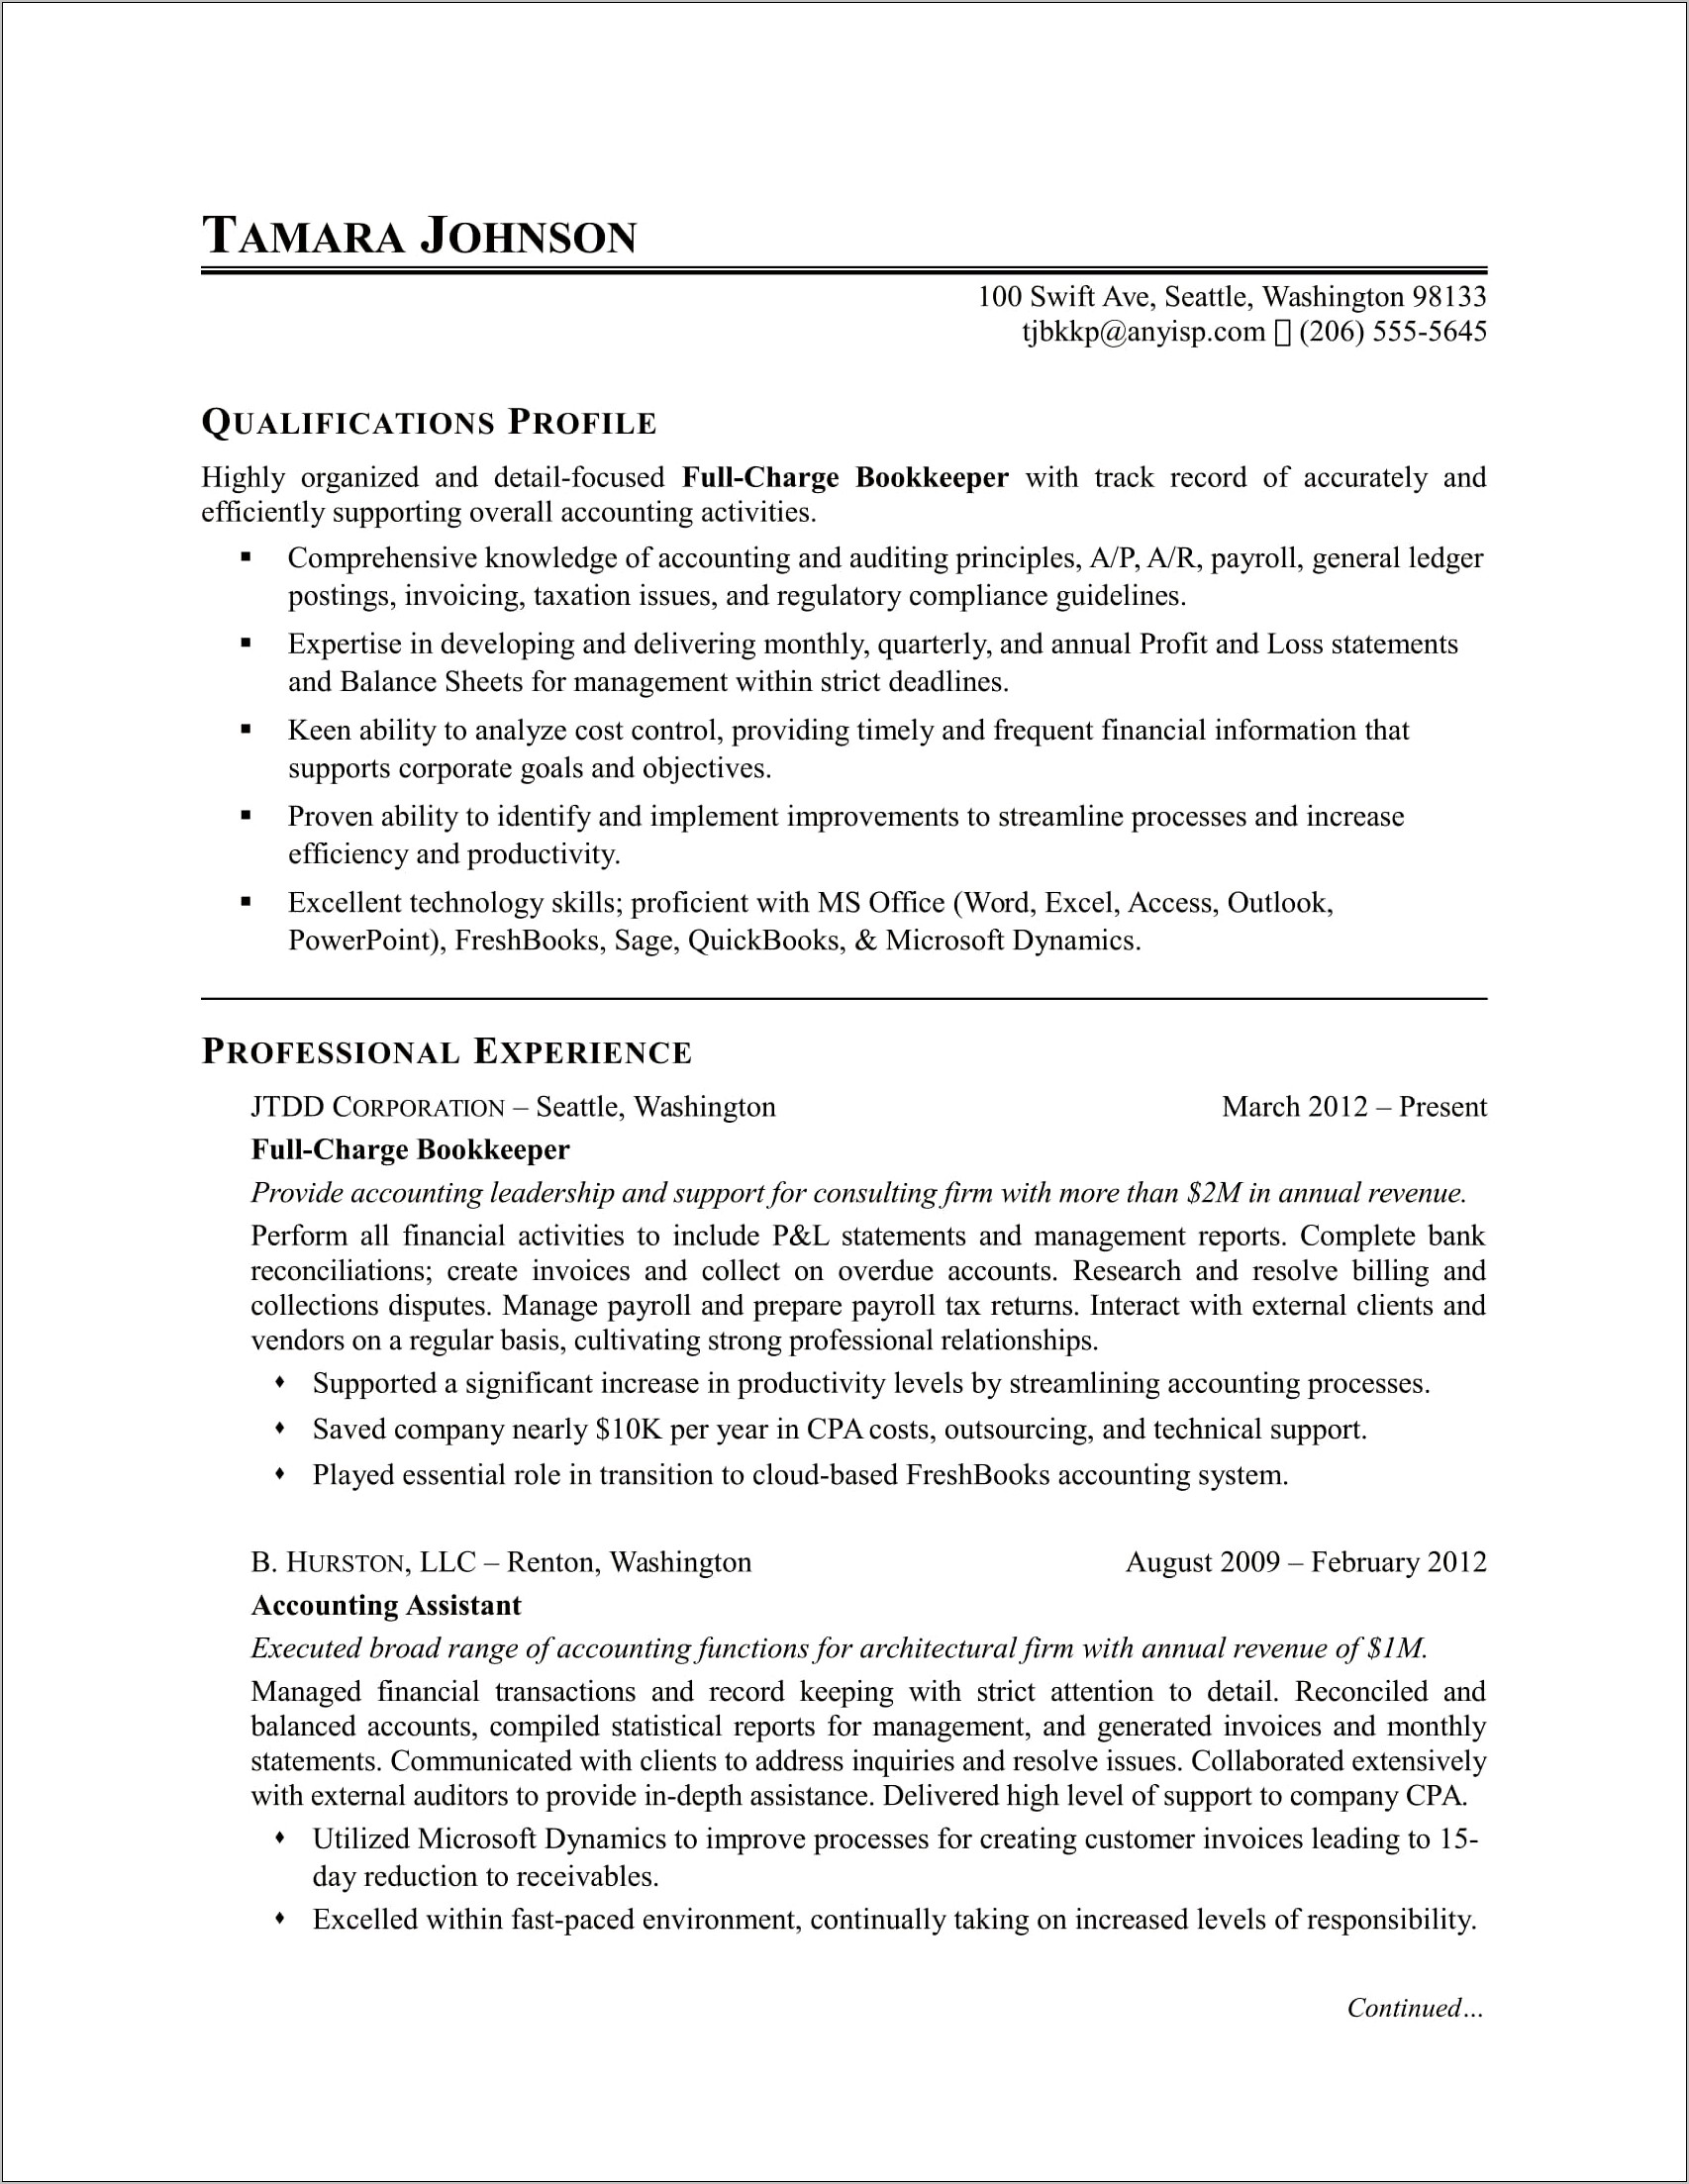 Resume Objective For Grocery Store Clerk